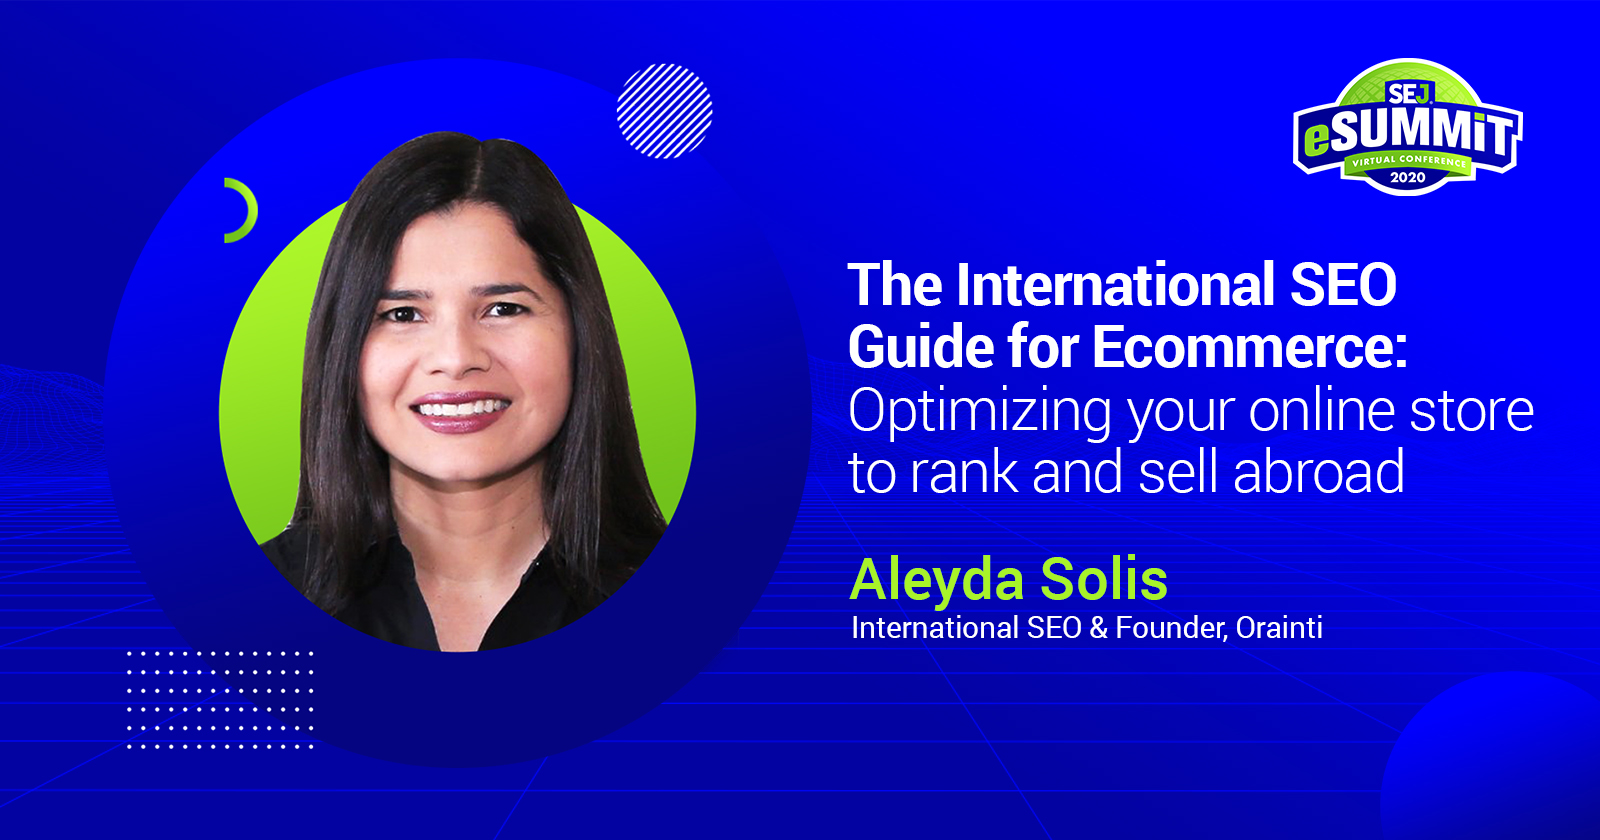 The International SEO Guide for Ecommerce - Aelyda Solis